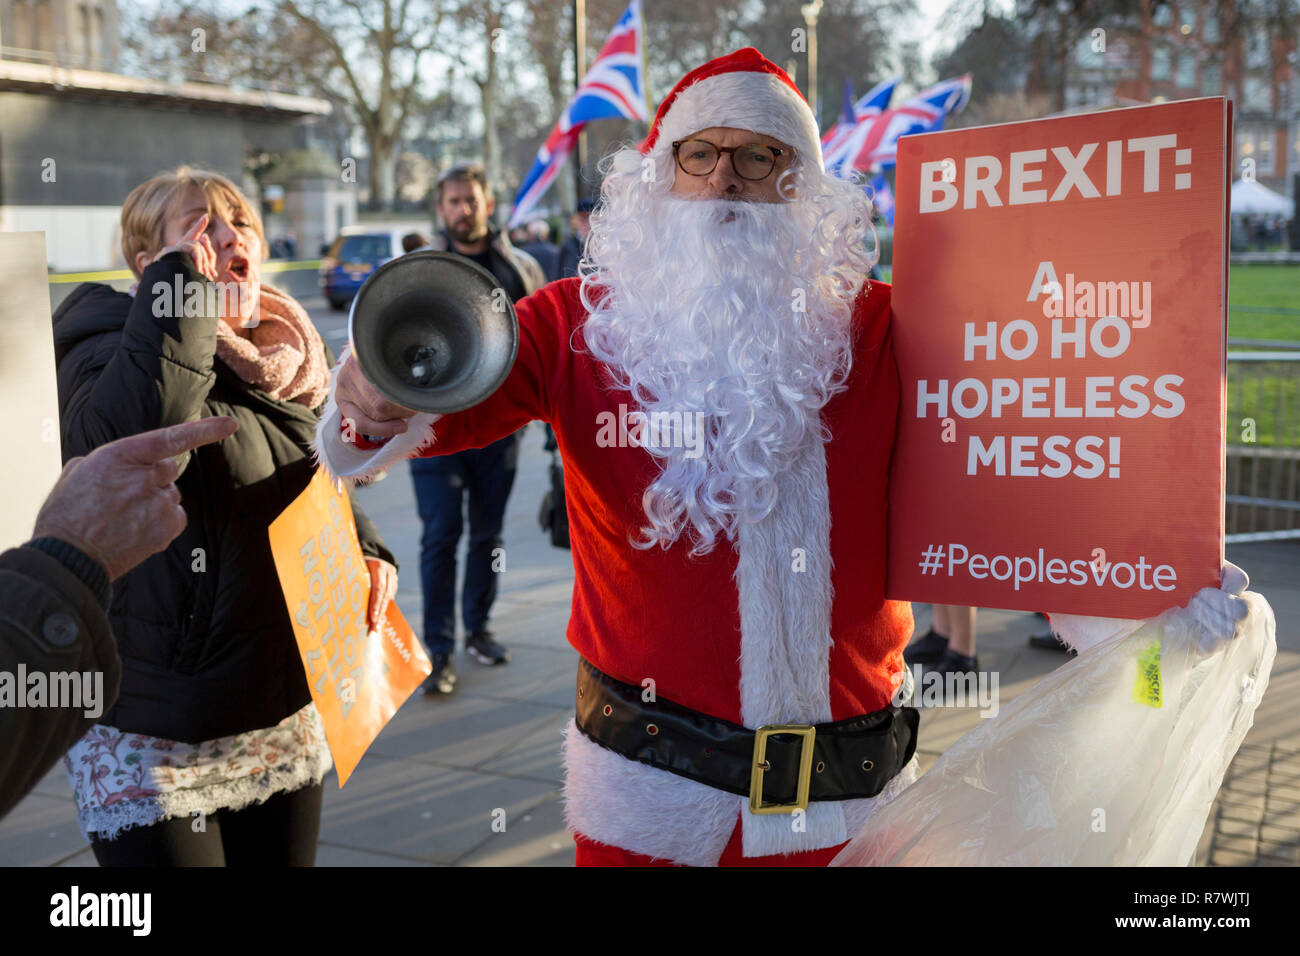 London, UK 11th December 2018: As Prime Minister Theresa May tours European capitals hoping to persuade foreign leaders to accept a new Brexit deal (following her cancellation of a Parliamentary vote), a pro-EU Santa ringing a Brexit bell is taunted by Brexiteers during a protest opposite the Houses of Parliament, on 11th December 2018, in London, England. Photo by Richard Baker / Alamy Live News Stock Photo